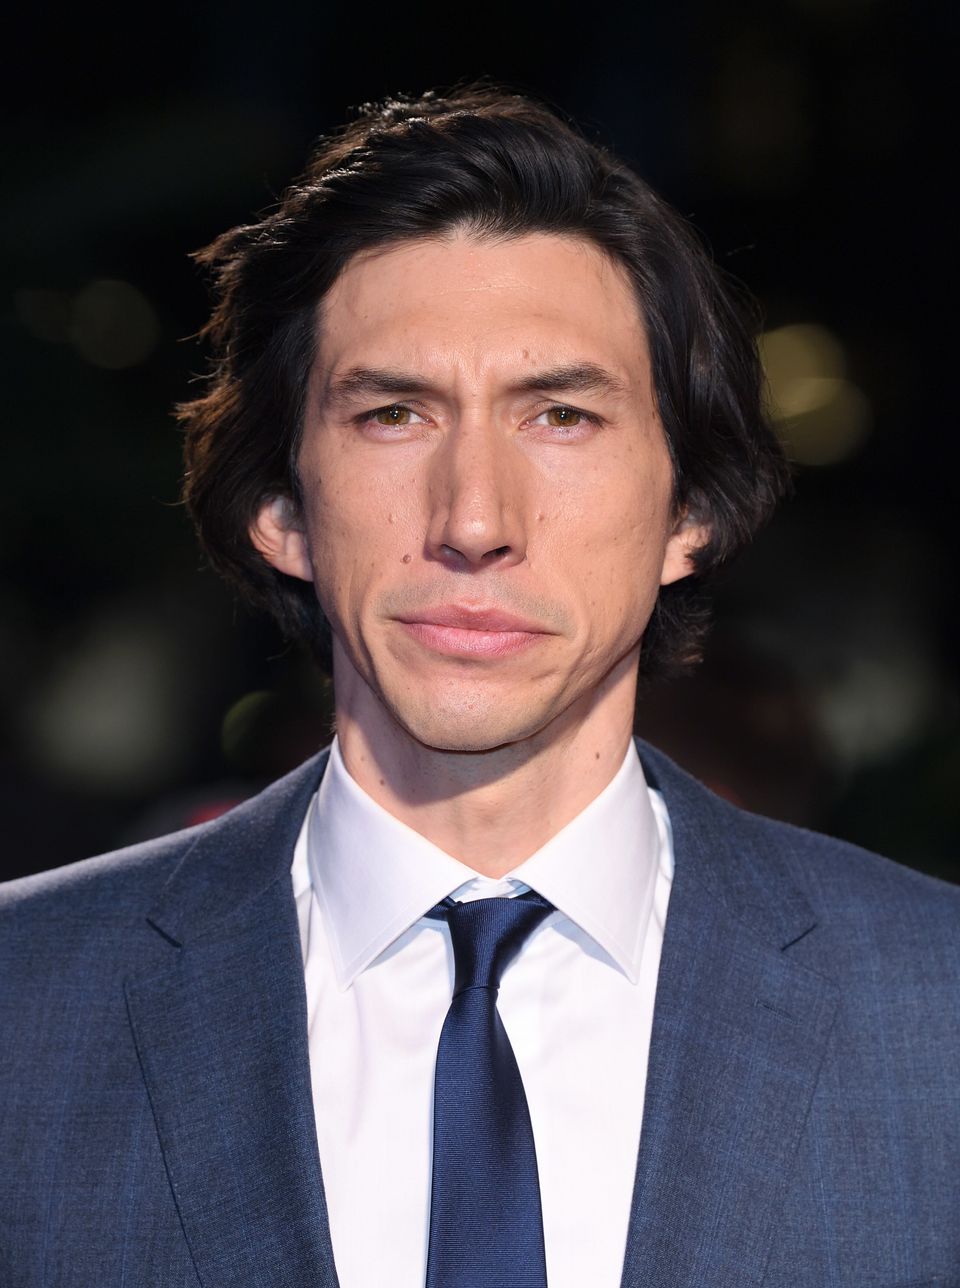 Adam Driver's appeal as an actor has been mischaracterised. He's a